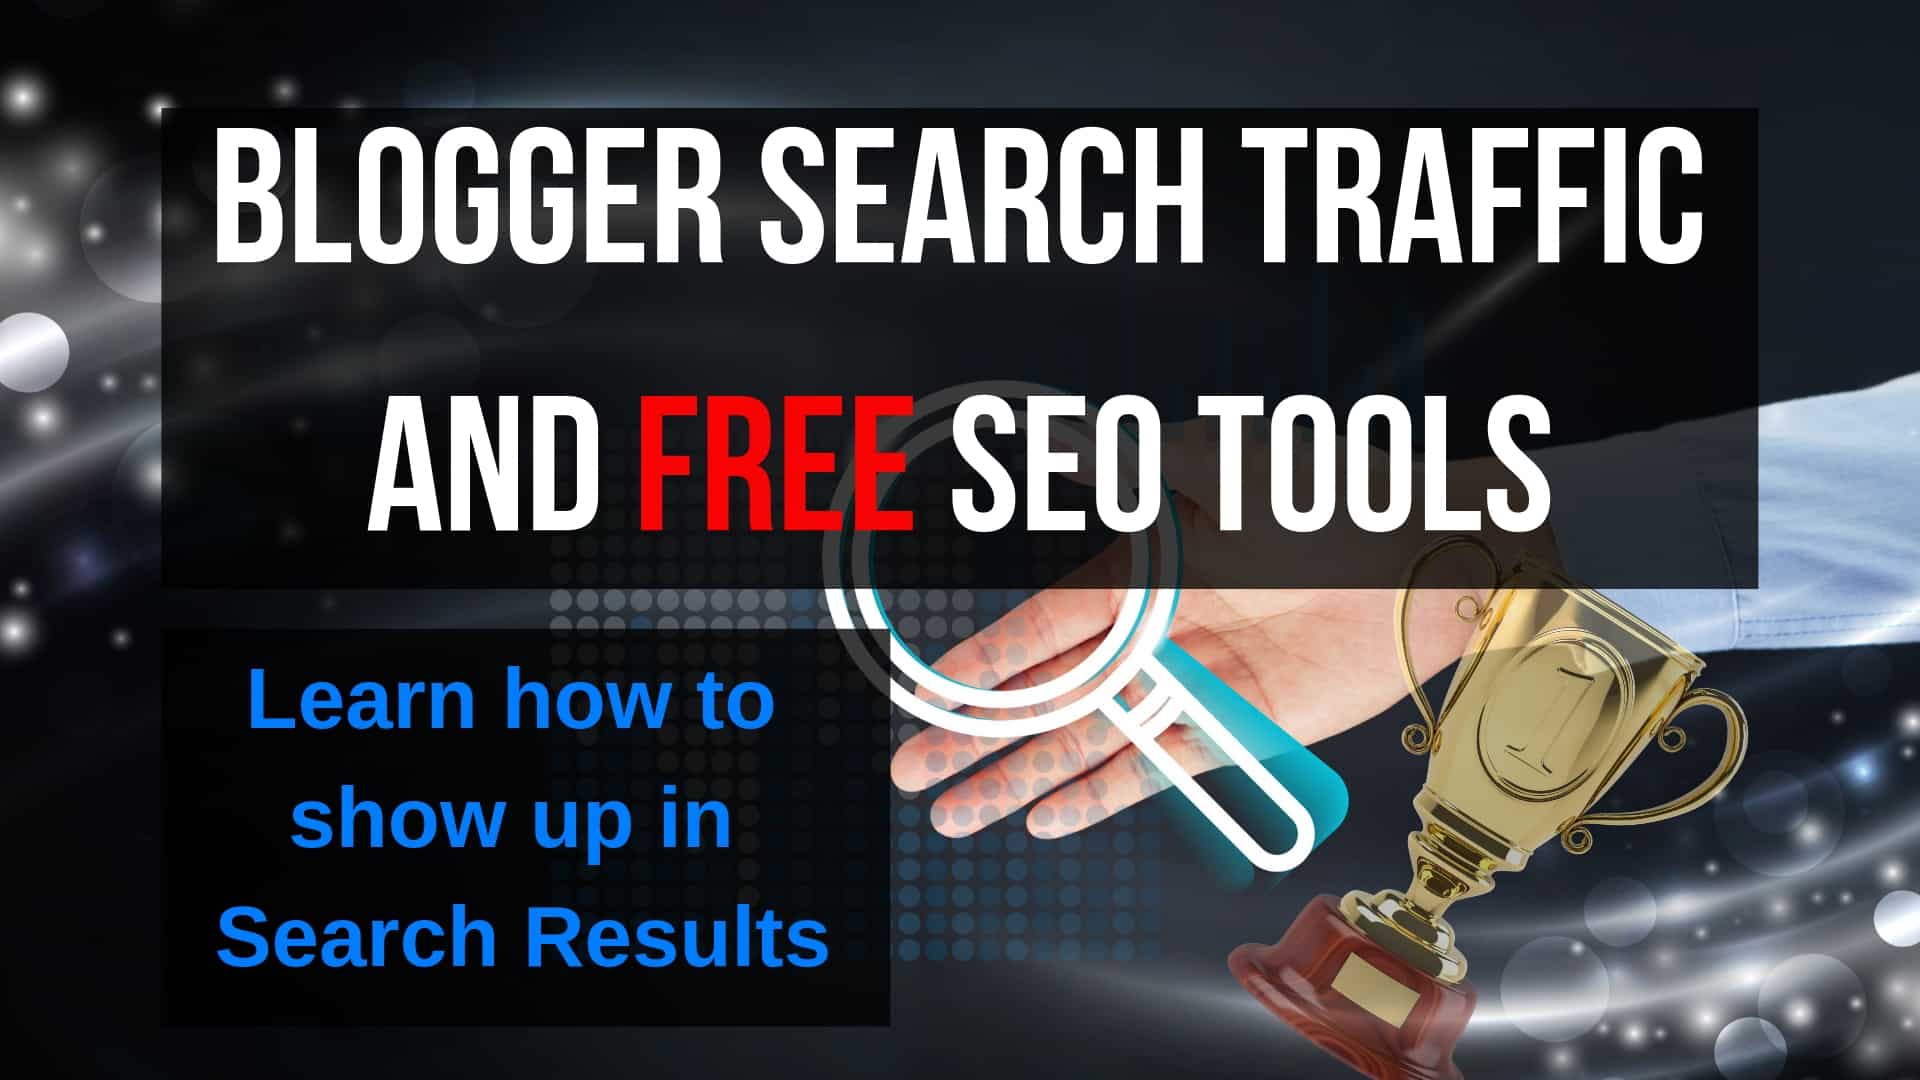 Blogger search traffic and free SEO tools